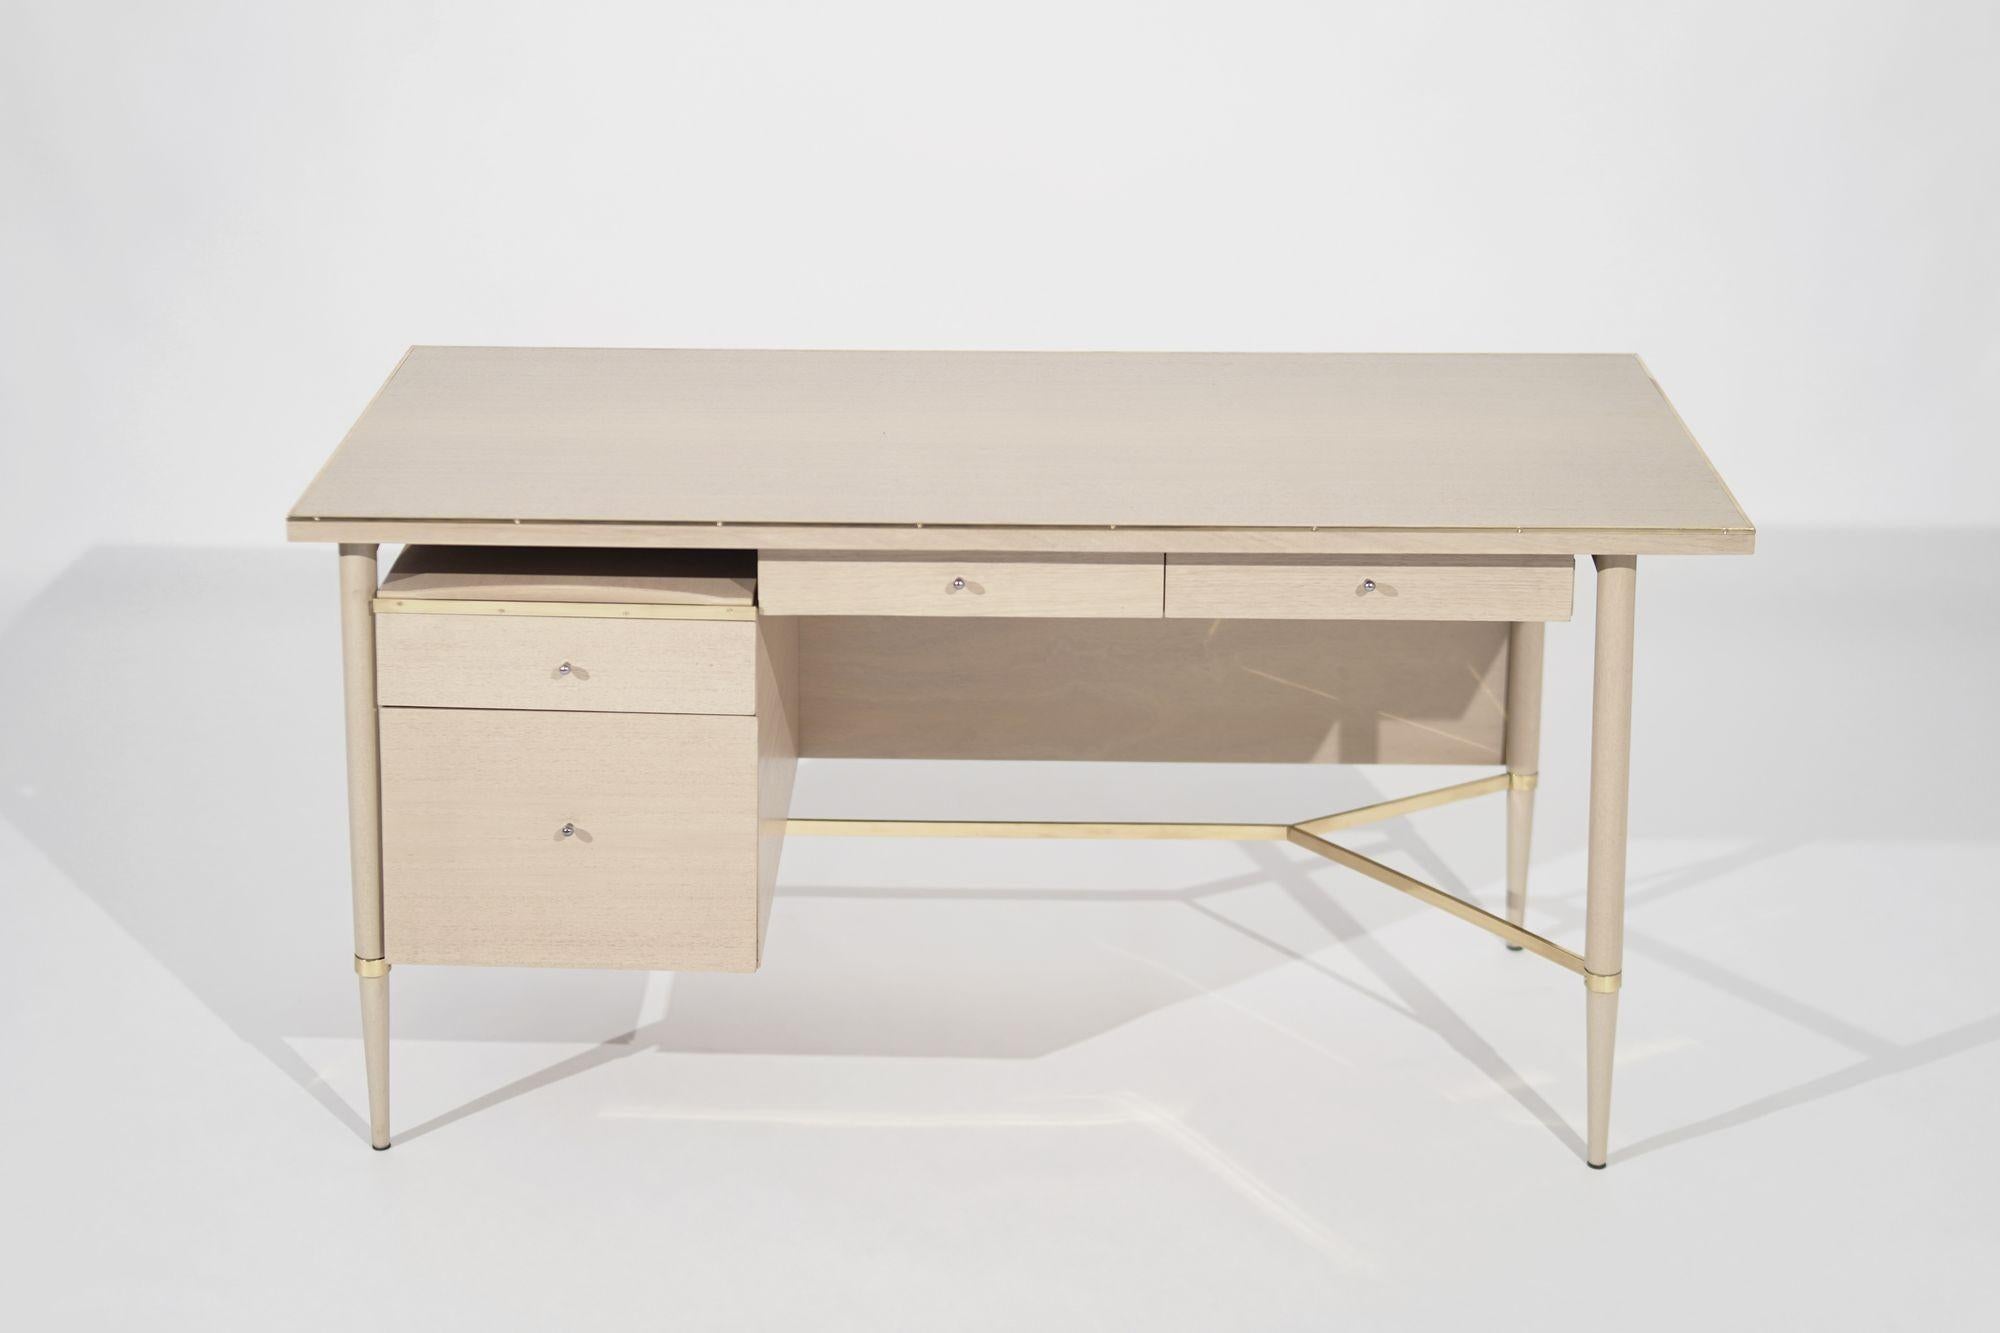 Introducing the Bleached Mahogany Desk from Paul McCobb's Connoisseur Collection, meticulously restored by Stamford Modern. Crafted in the 1950s, this mid-century icon boasts minimalistic lines, sleek silhouette, and bleached mahogany warmth. Brass